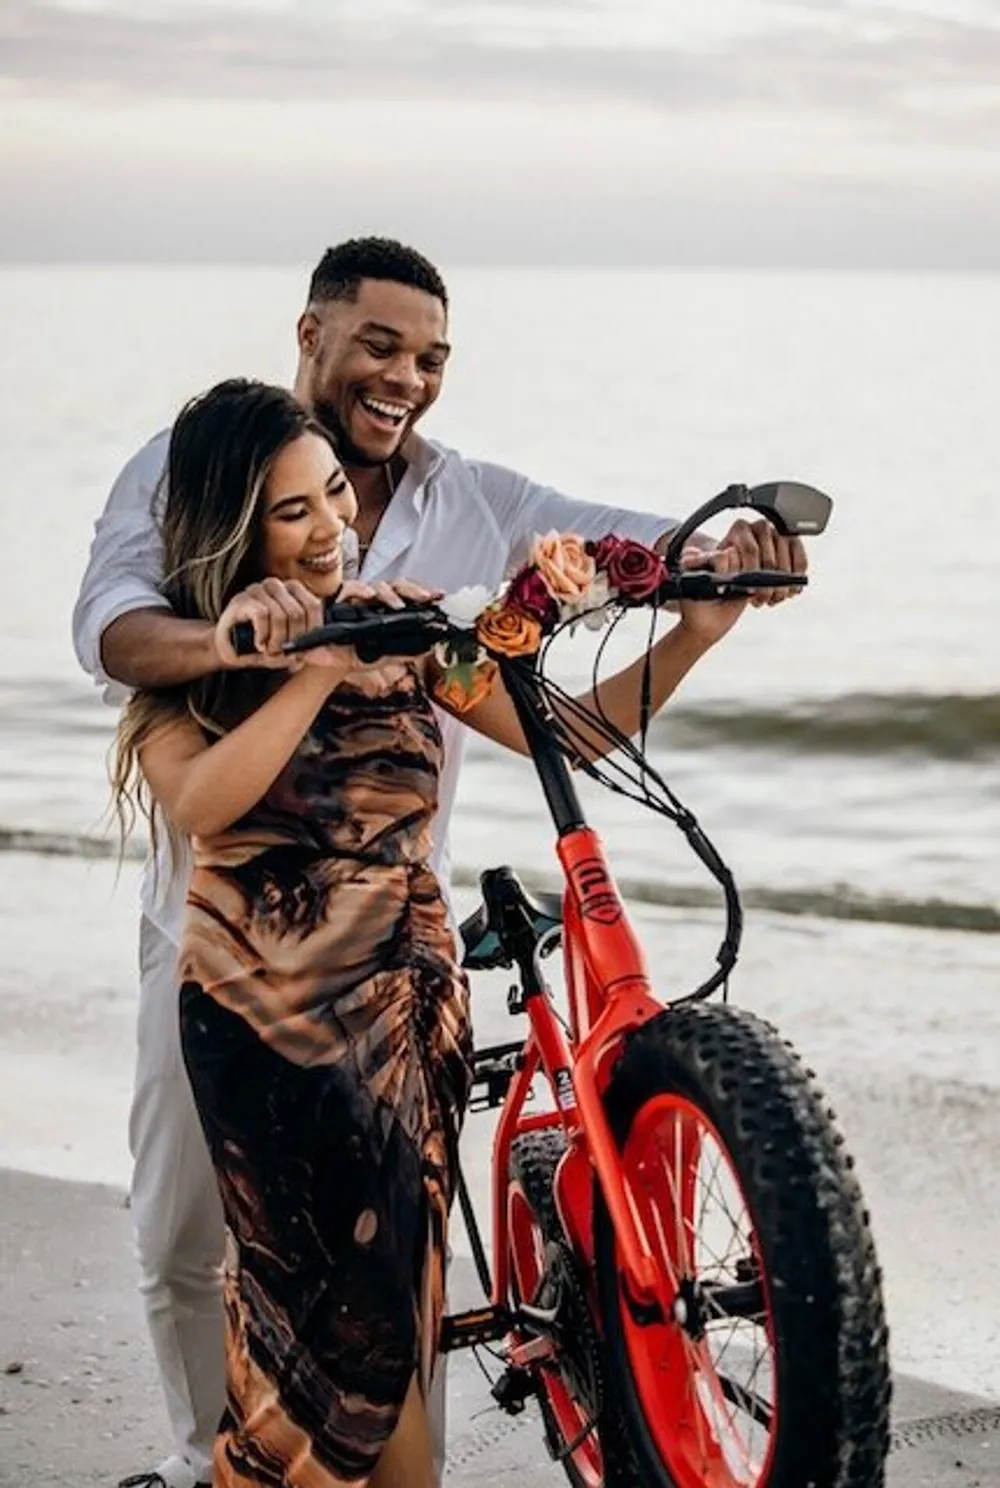 A smiling couple stands close together on a beach with the woman reaching out to touch the handlebar of a red fat-tire bicycle adorned with roses conveying a moment of joy and intimacy